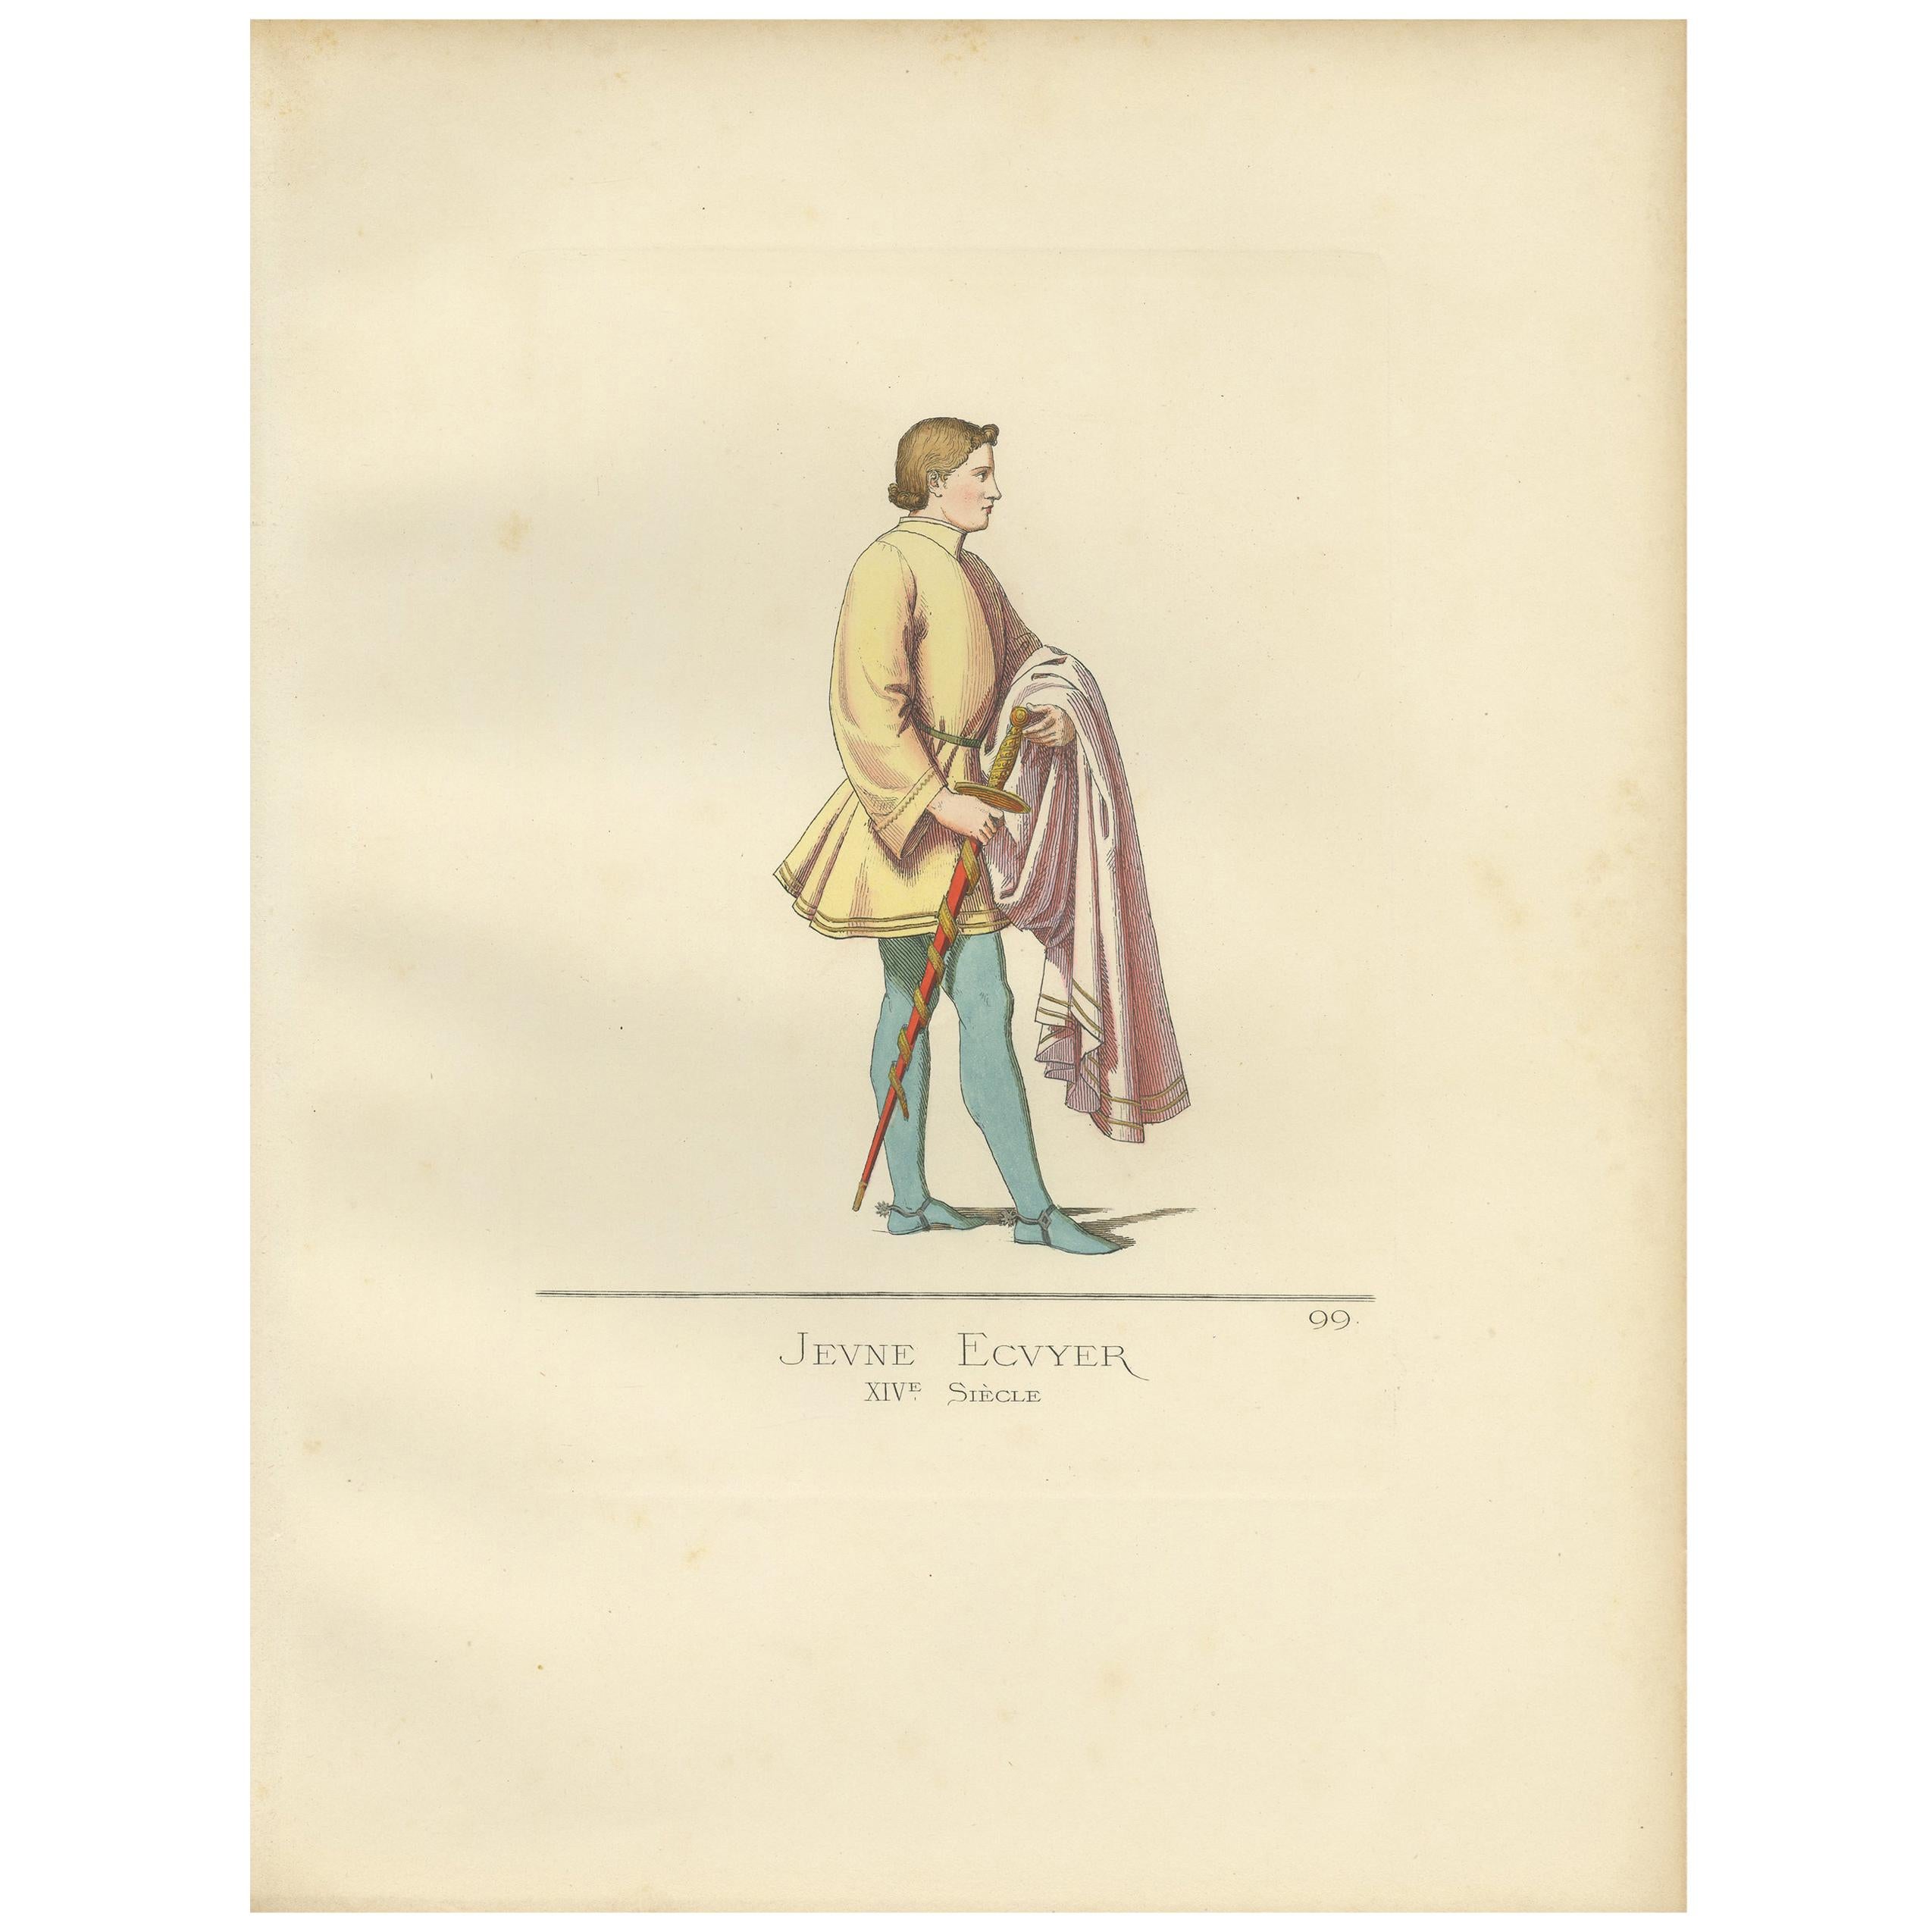 Antique Print of a Young Squire, Italy, 14th Century, by Bonnard, 1860